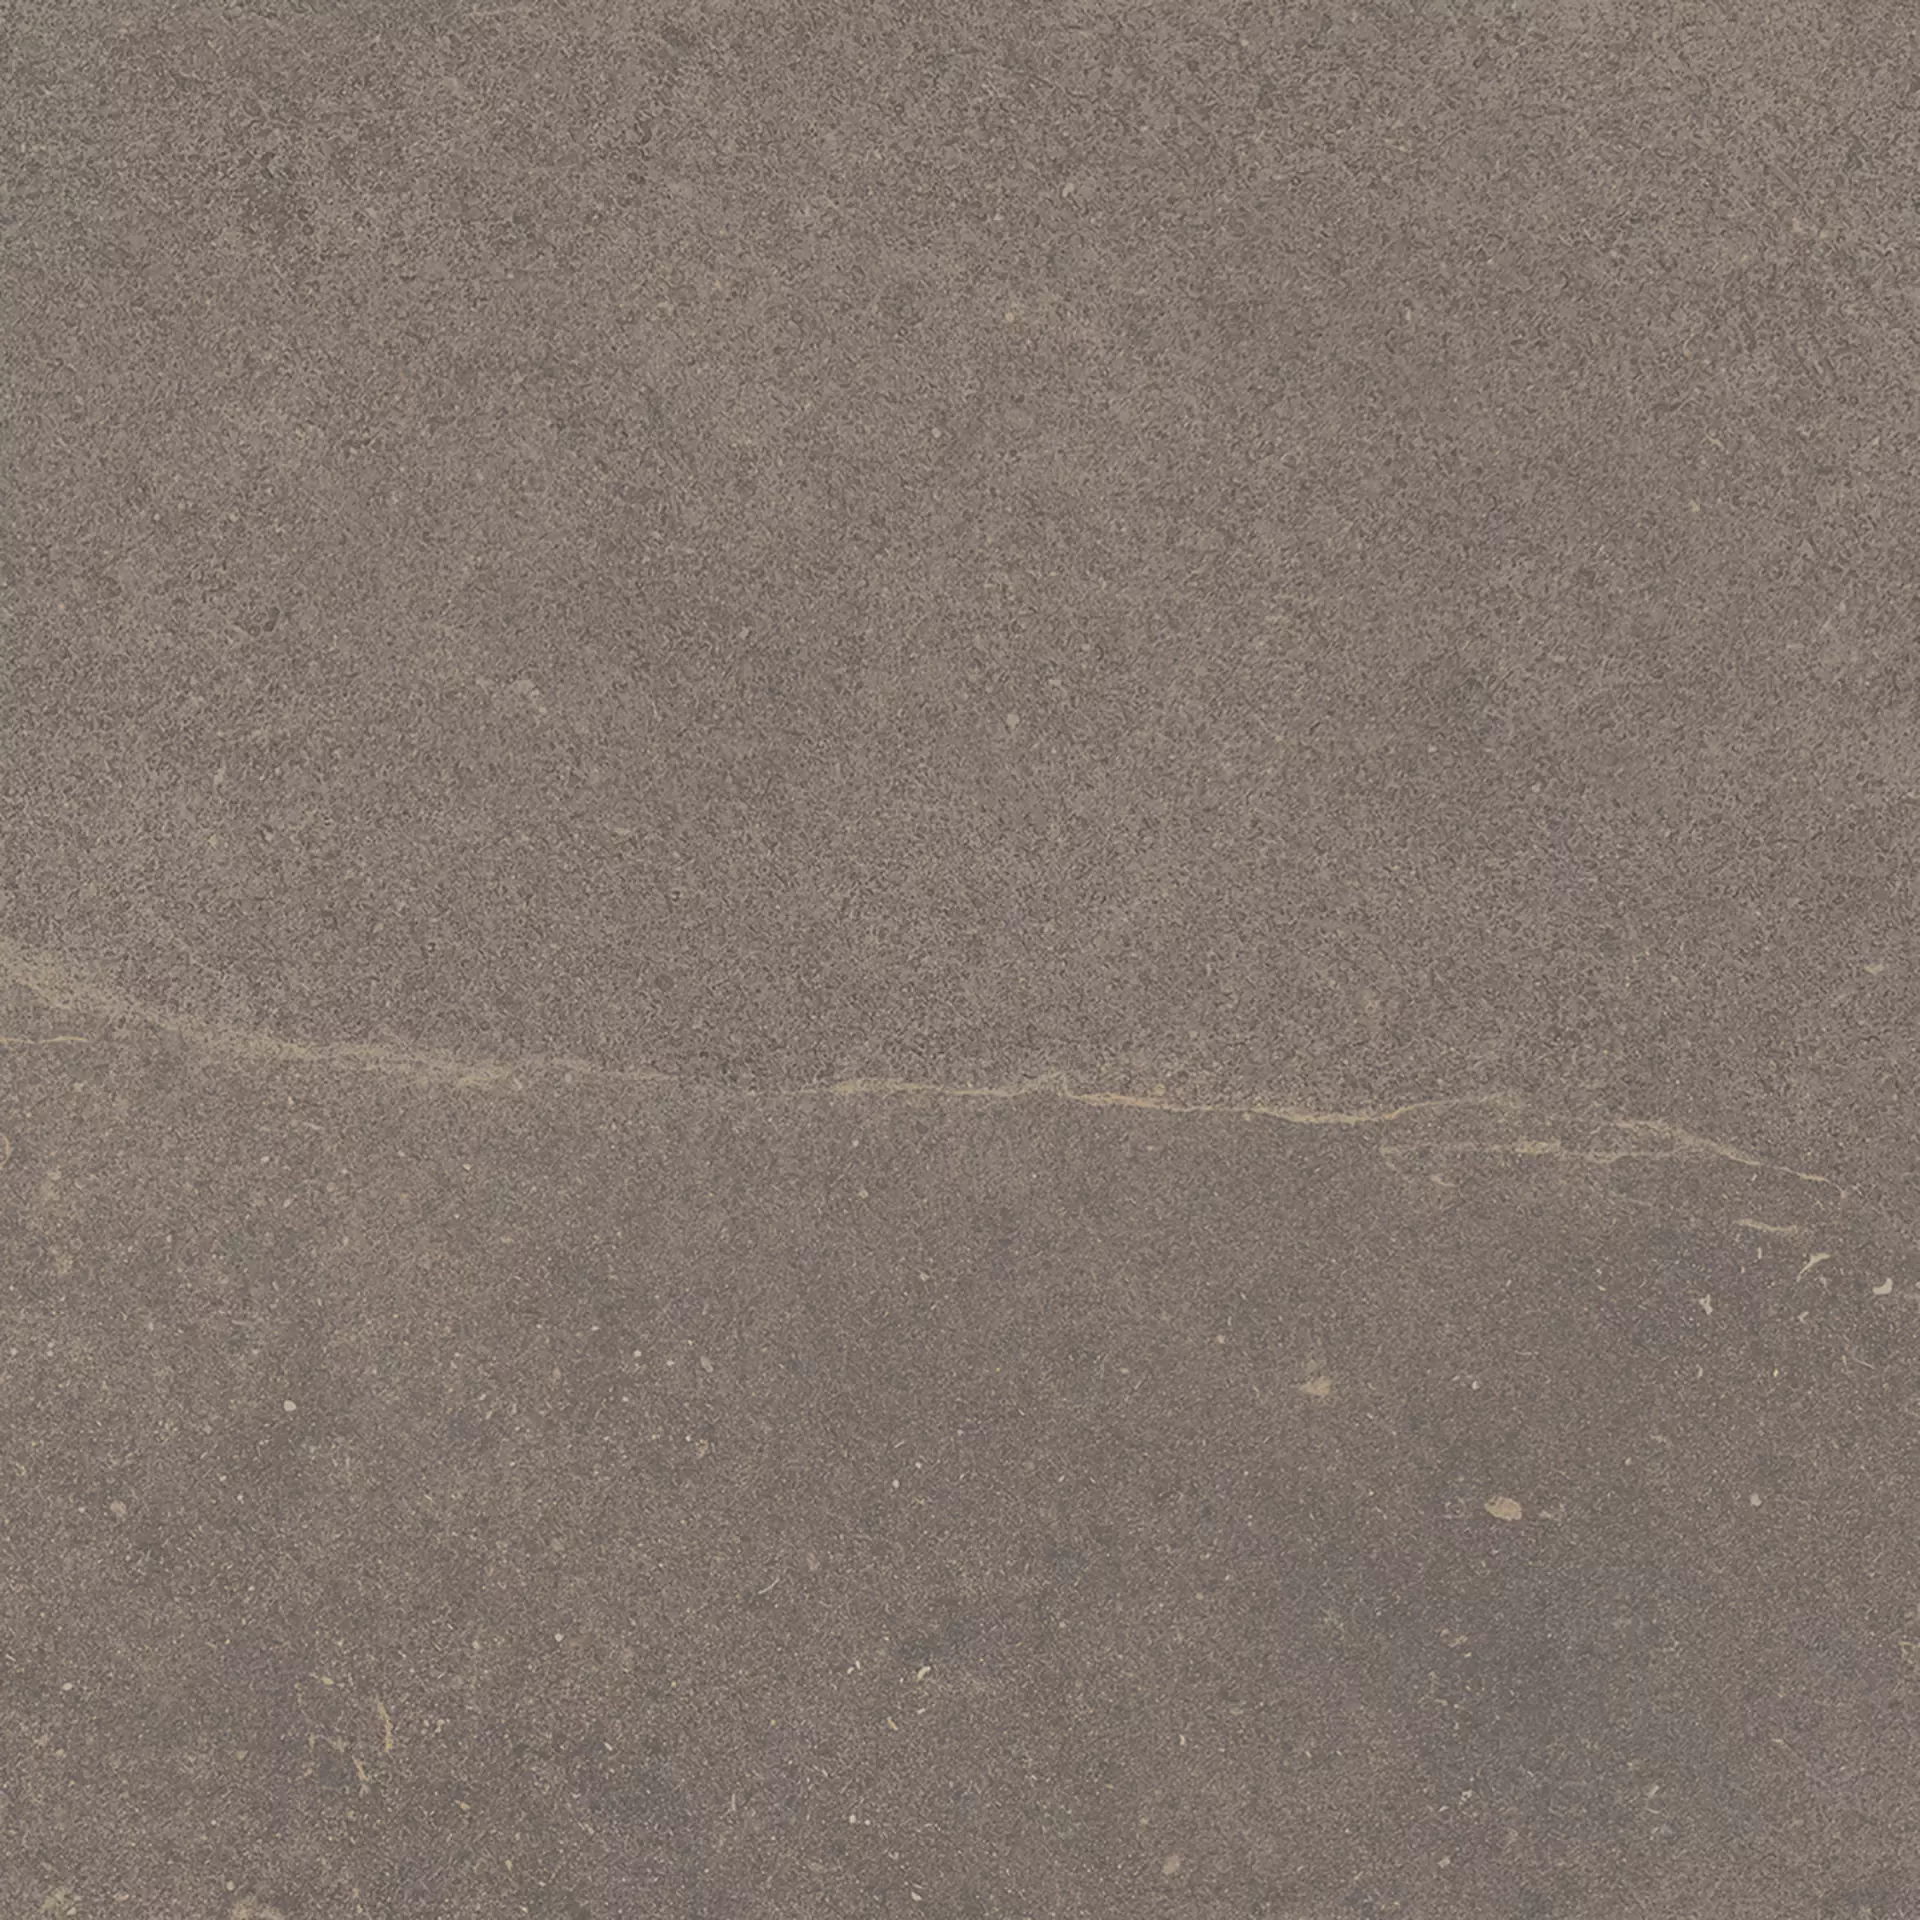 Fondovalle Planeto Mars Natural PNT299 80x80cm rectified 8,5mm